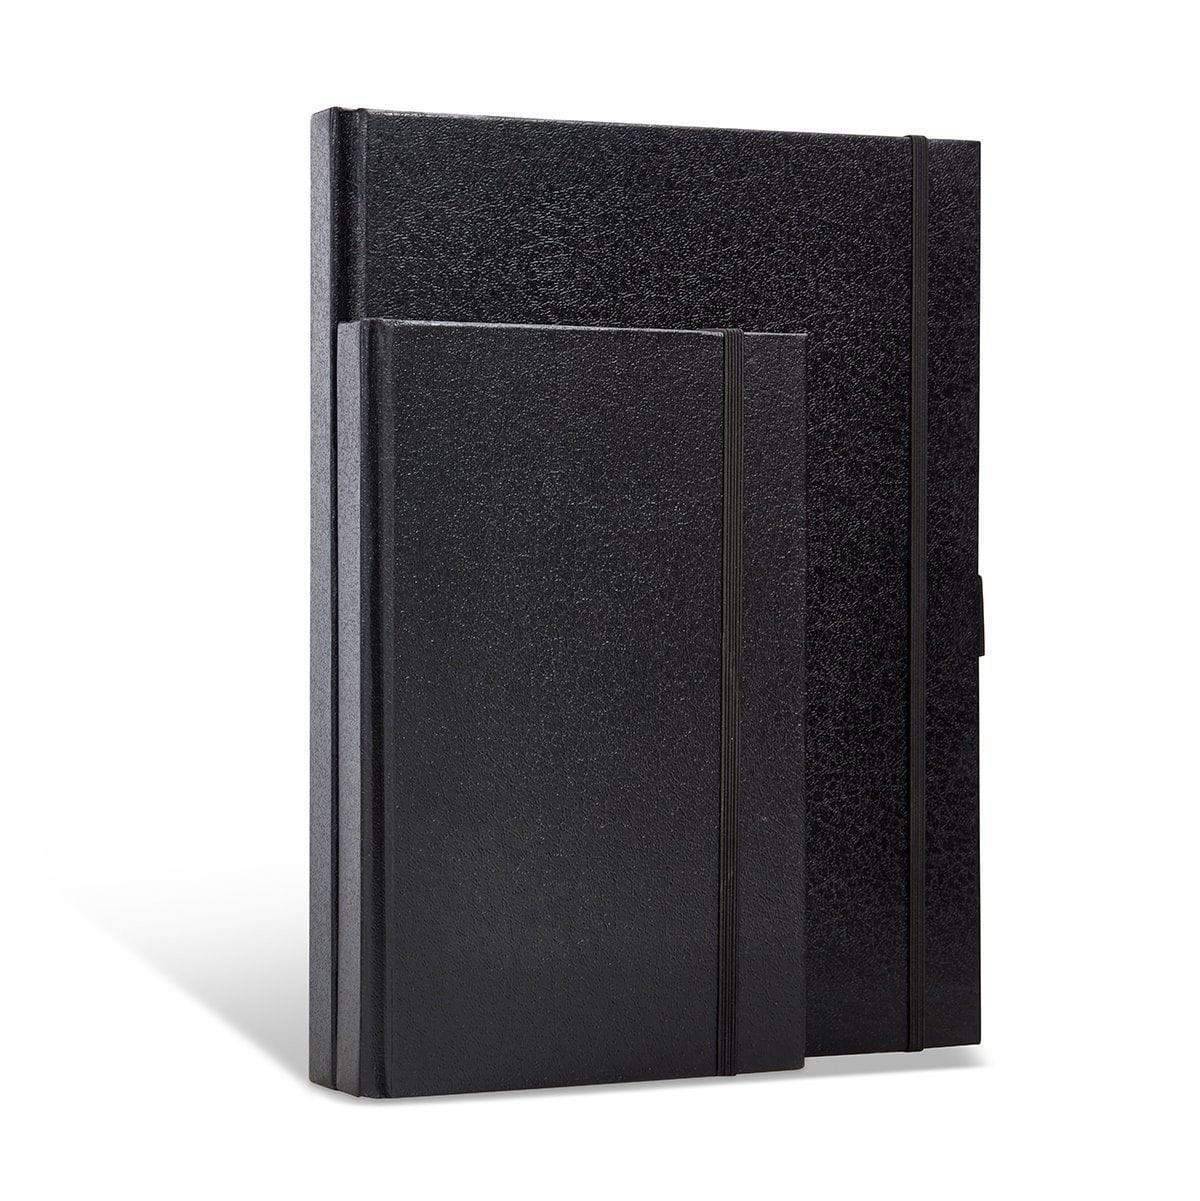 KINGART 620 Black Hardcover 9 X 12 Sketchbook Journal with Side Wire  Spiral, Micro-Preforated Pages for Clean Removal, 60 Pound (90 GSM),  Acid-Free